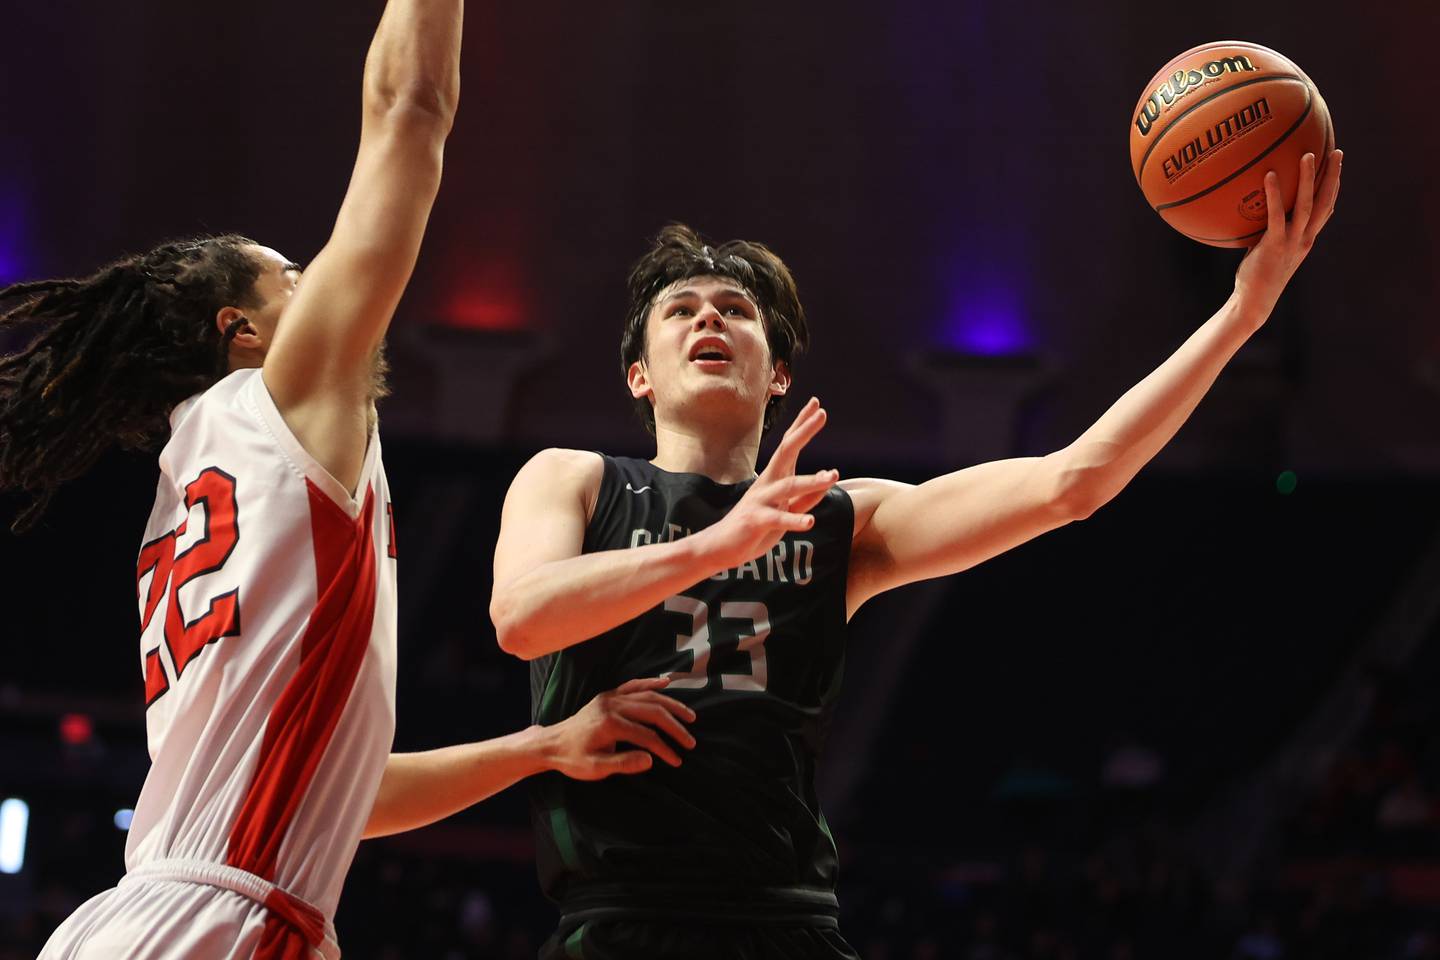 Glenbard West’s Bobby Durkin lays in a shot against Bolingbrook in the Class 4A semifinal at State Farm Center in Champaign. Friday, Mar. 11, 2022, in Champaign.